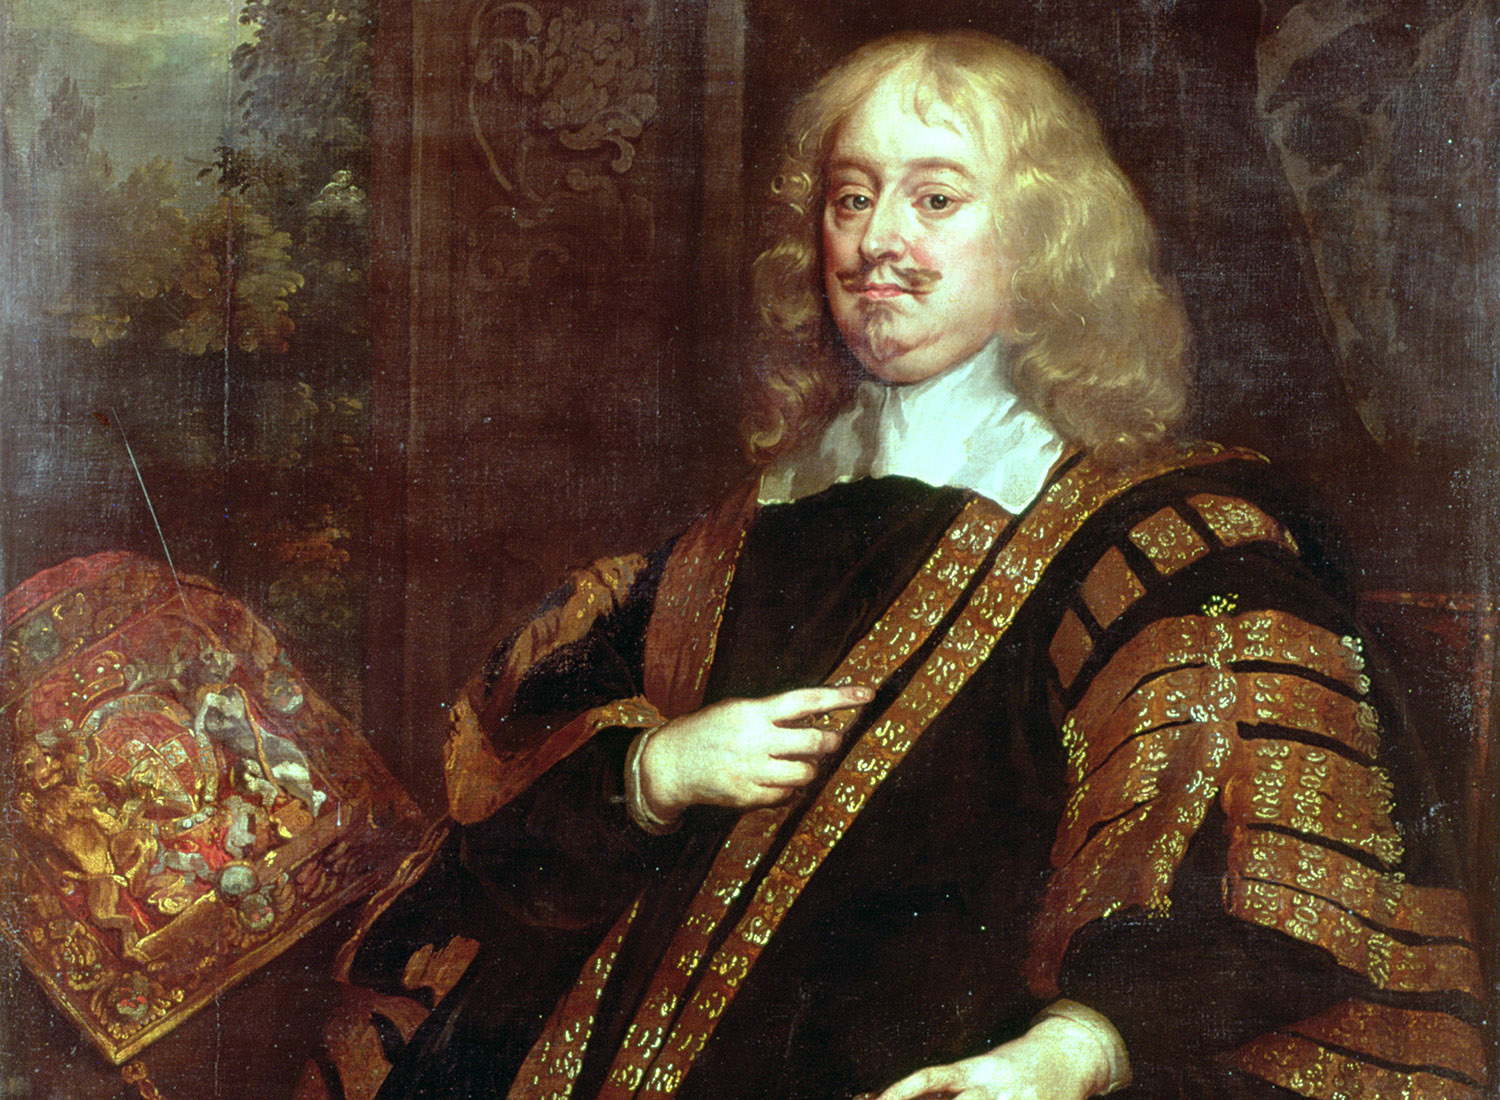 Edward Hyde, Earl of Clarendon as Lord High Chancellor, by Peter Lely, c.1666. Ⓒ Middle Temple London / Bridgeman Images.